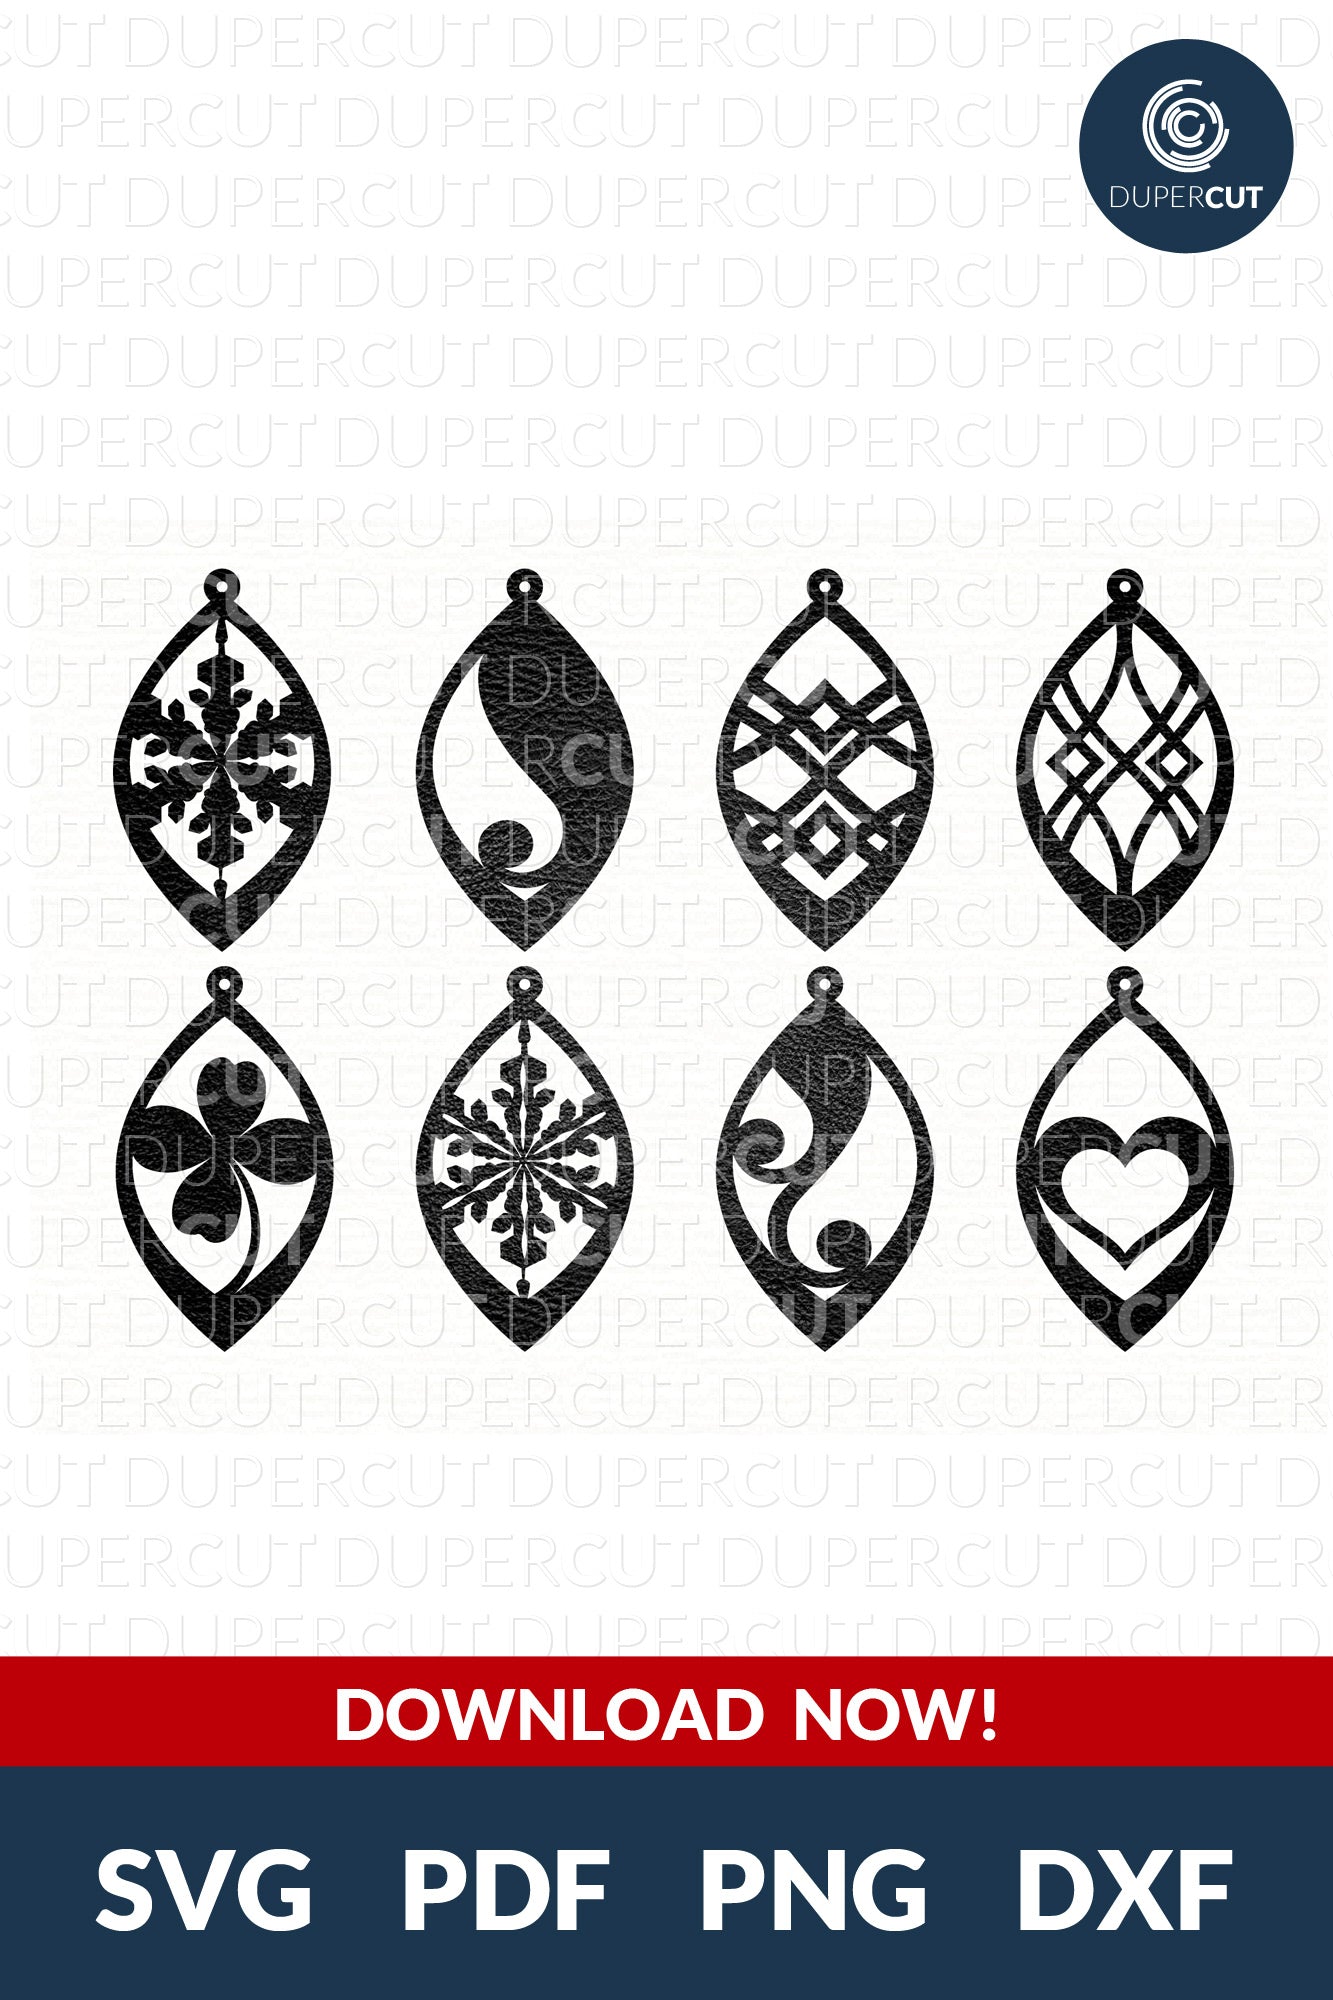 DIY Simple shapes Leather Earrings SVG PDF DXF vector files. Jewellery making template for laser and cutting machines - Glowforge, Cricut, Silhouette Cameo.